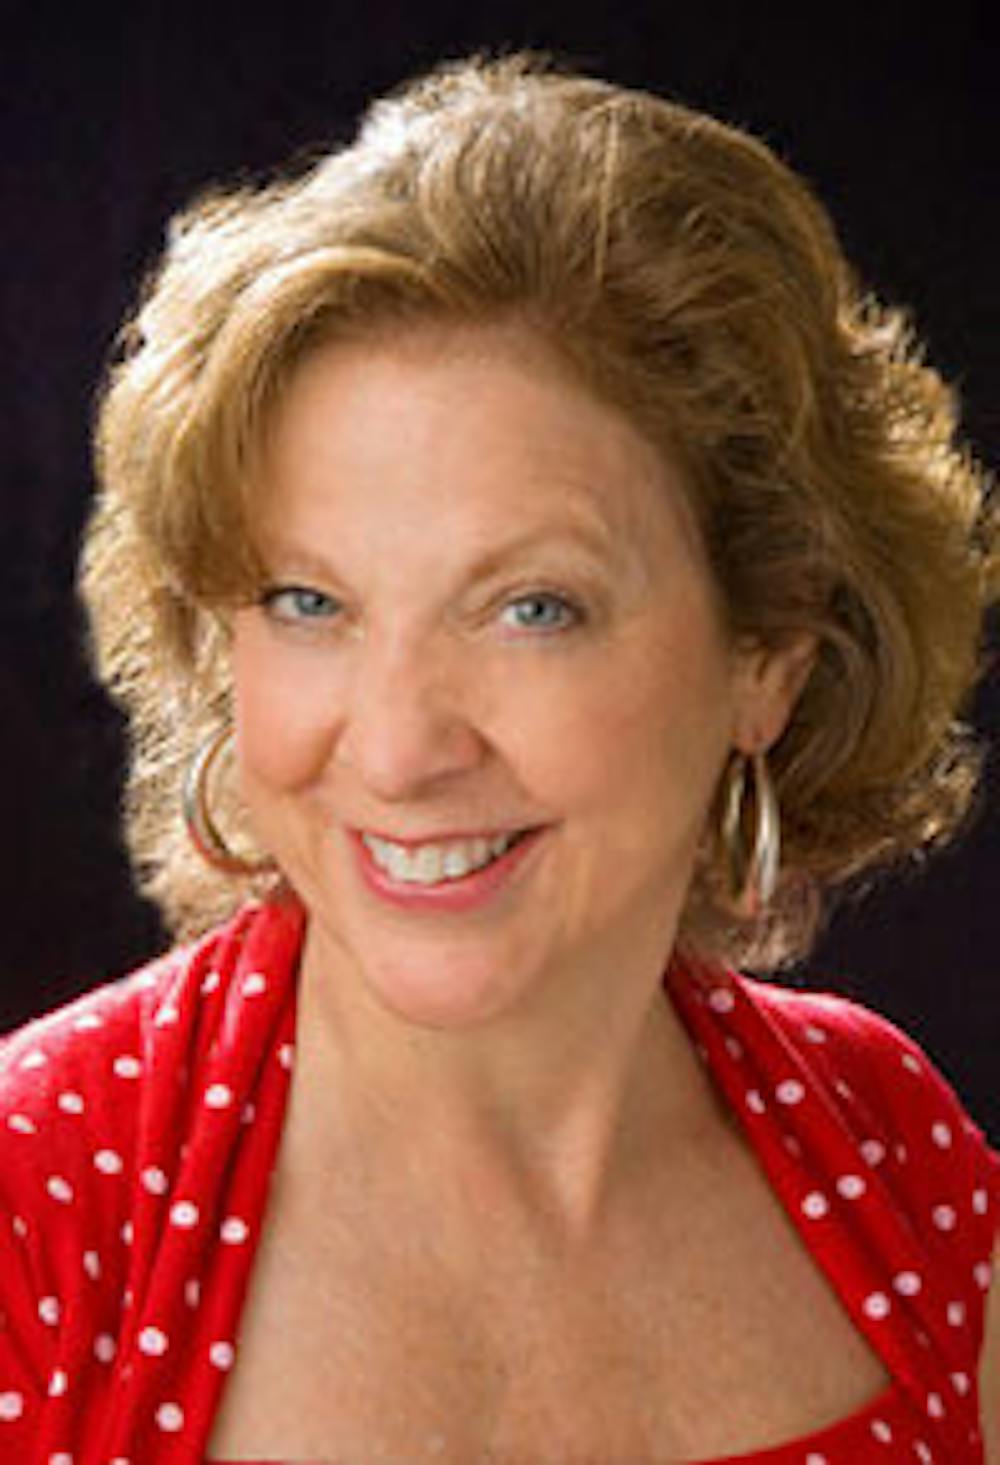 Dr. Martha Malone is the Chair of Vocal Studies and the Director of Opera of the Townsend School of Music.